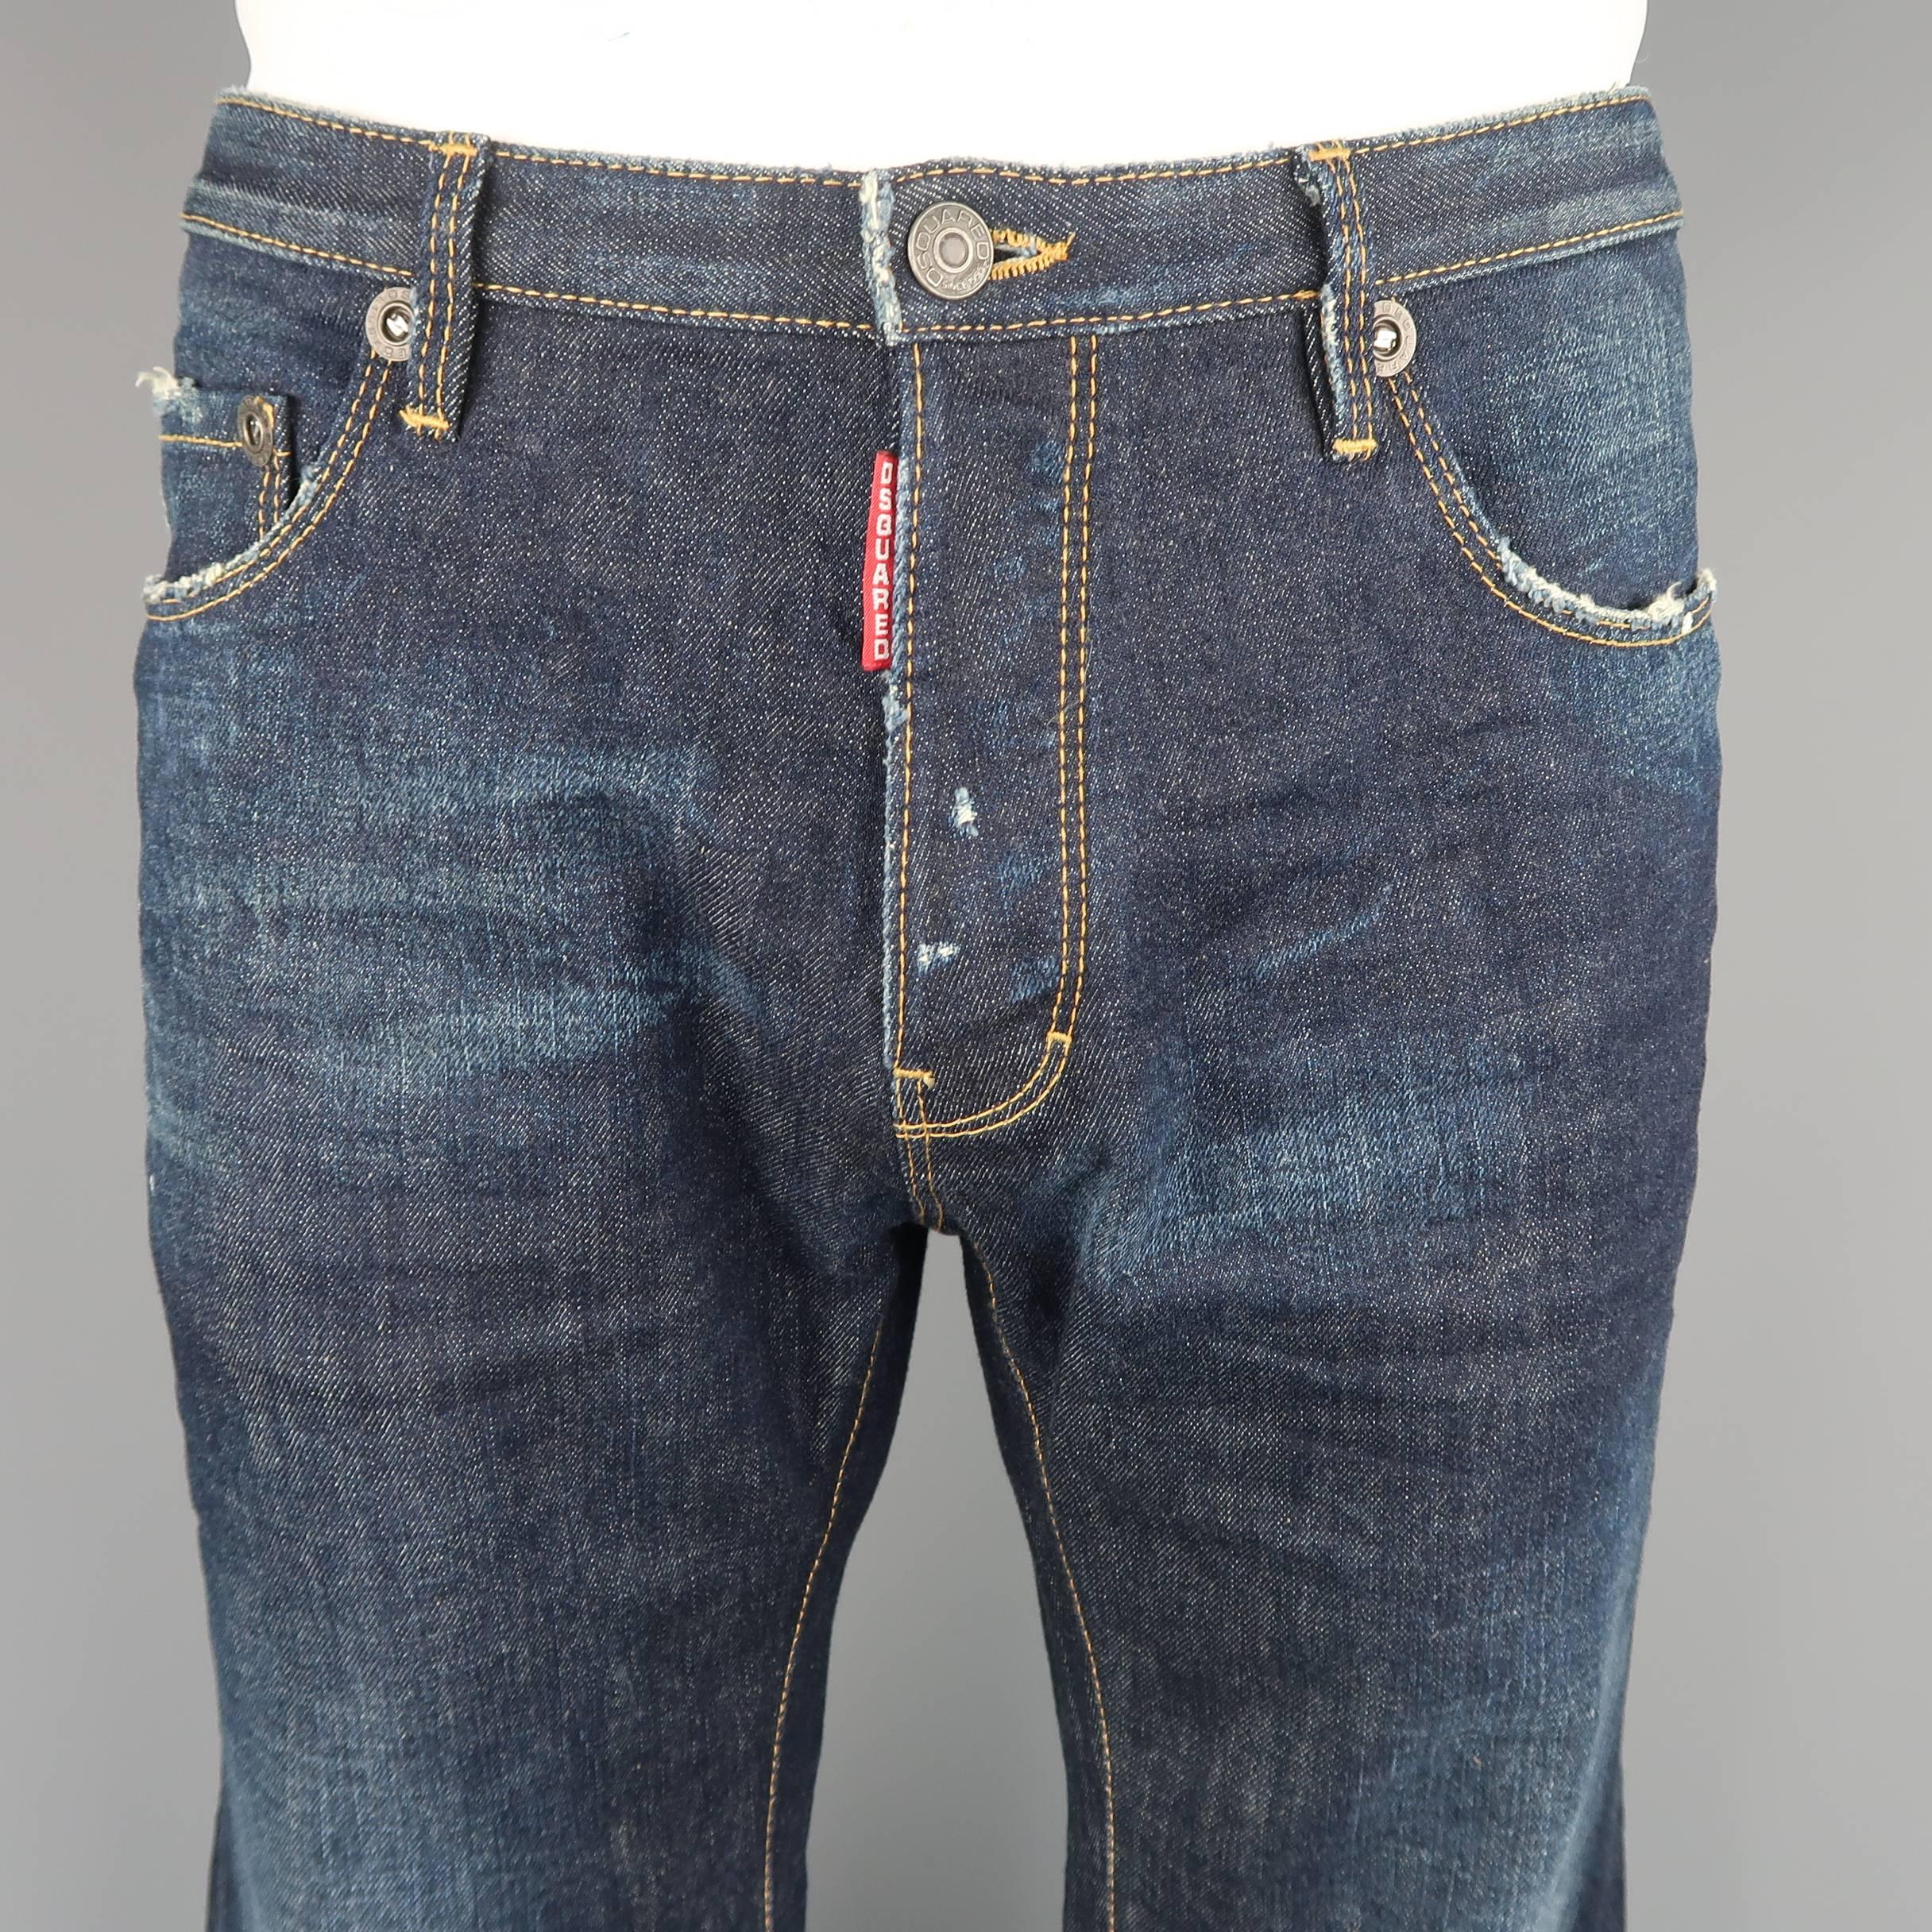 DSQUARED2 jeans come in dark dirty washed denim with contrast stitching, logo tab fly, white paint splatters, and distressed details throughout. Made in Italy.
 
Excellent Pre-Owned Condition.
Marked: IT 50
 
Measurements:
 
Waist: 36 in.
Rise: 10